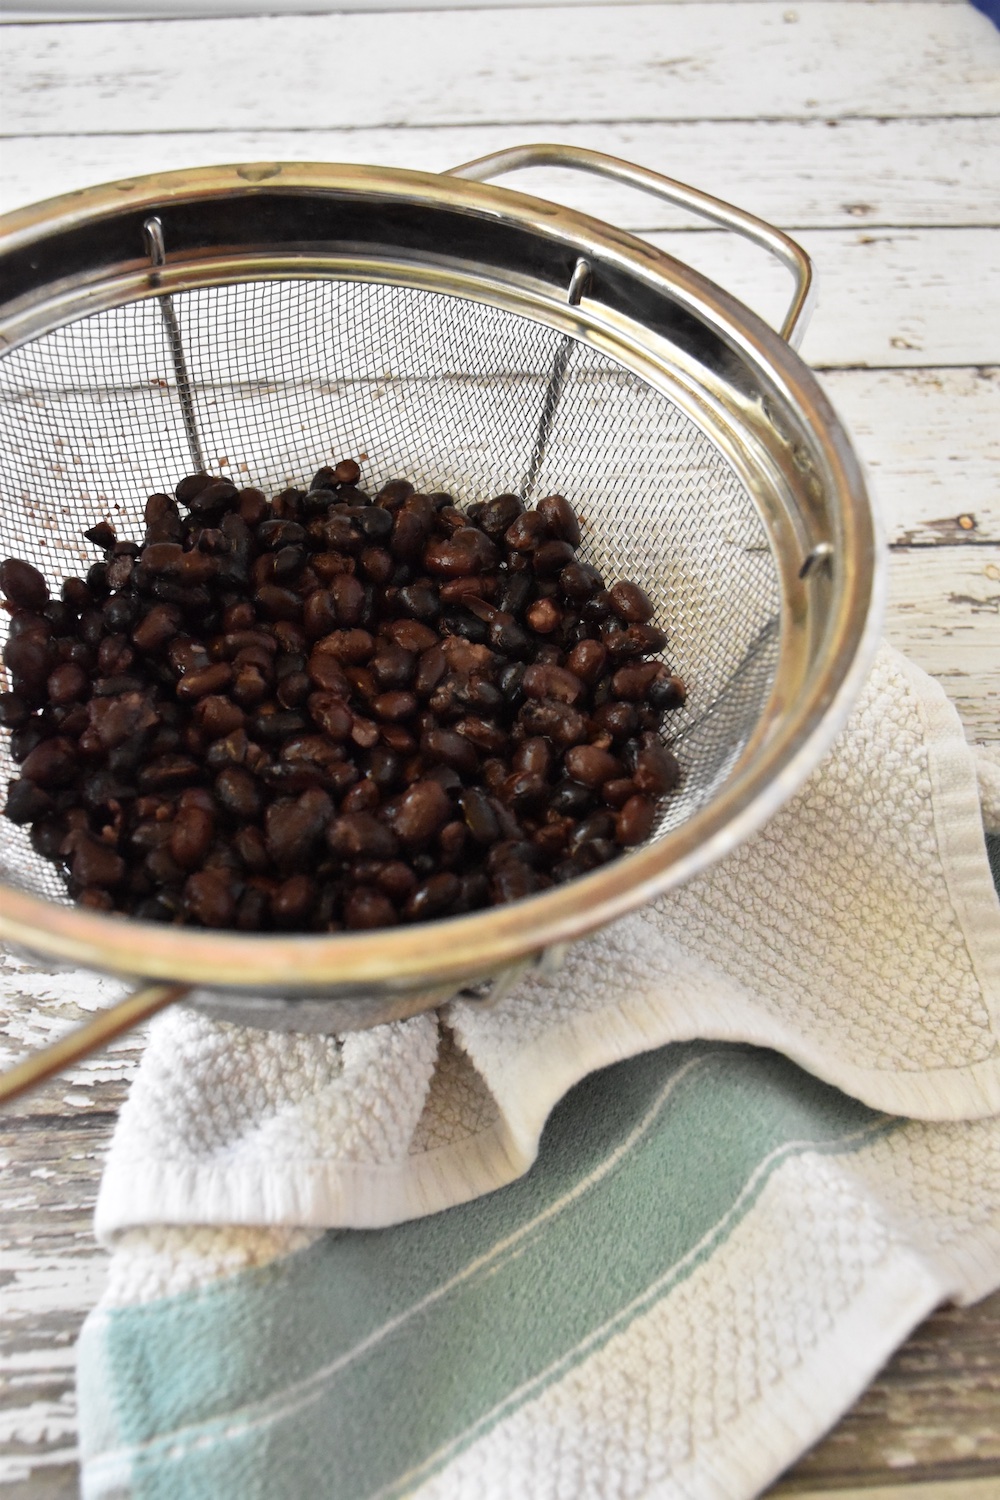 Gluten-free dairy-free bang for your buck ingredient: Black Beans